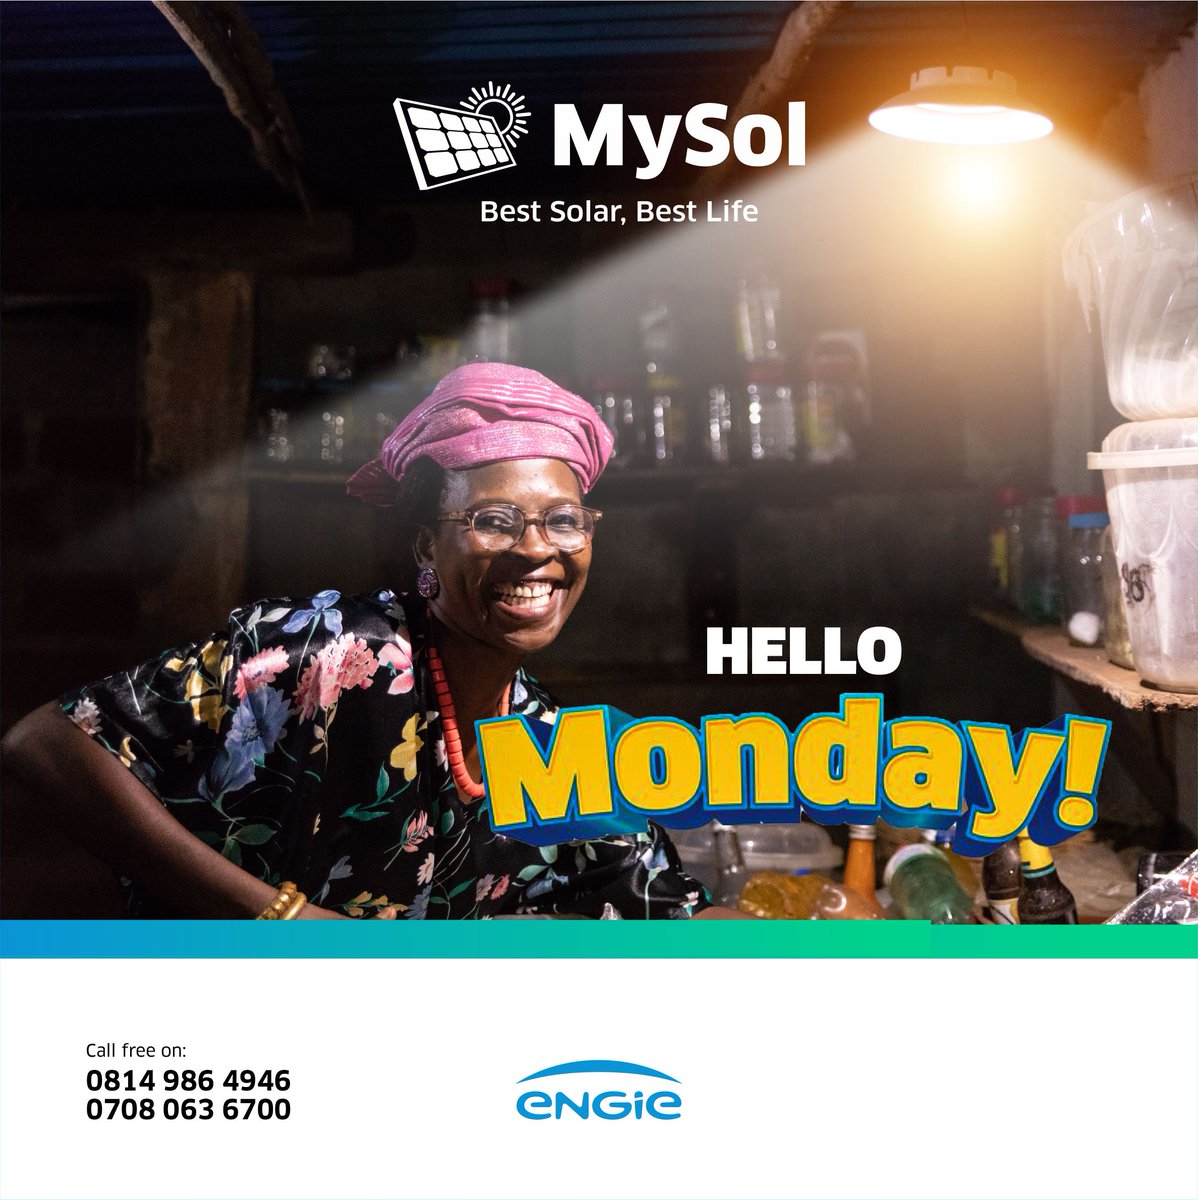 Hello MySol Stars! ✨
It's a brand new week filled with endless possibilities.
Let's ignite our passion, chase our dreams, and shine brighter than ever before.
We're your #Lighthouse company.
#MySolSolar #MondayMotivation #ENGIE #RenewableEnergy #ActWithENGIE #MySolBestSolar